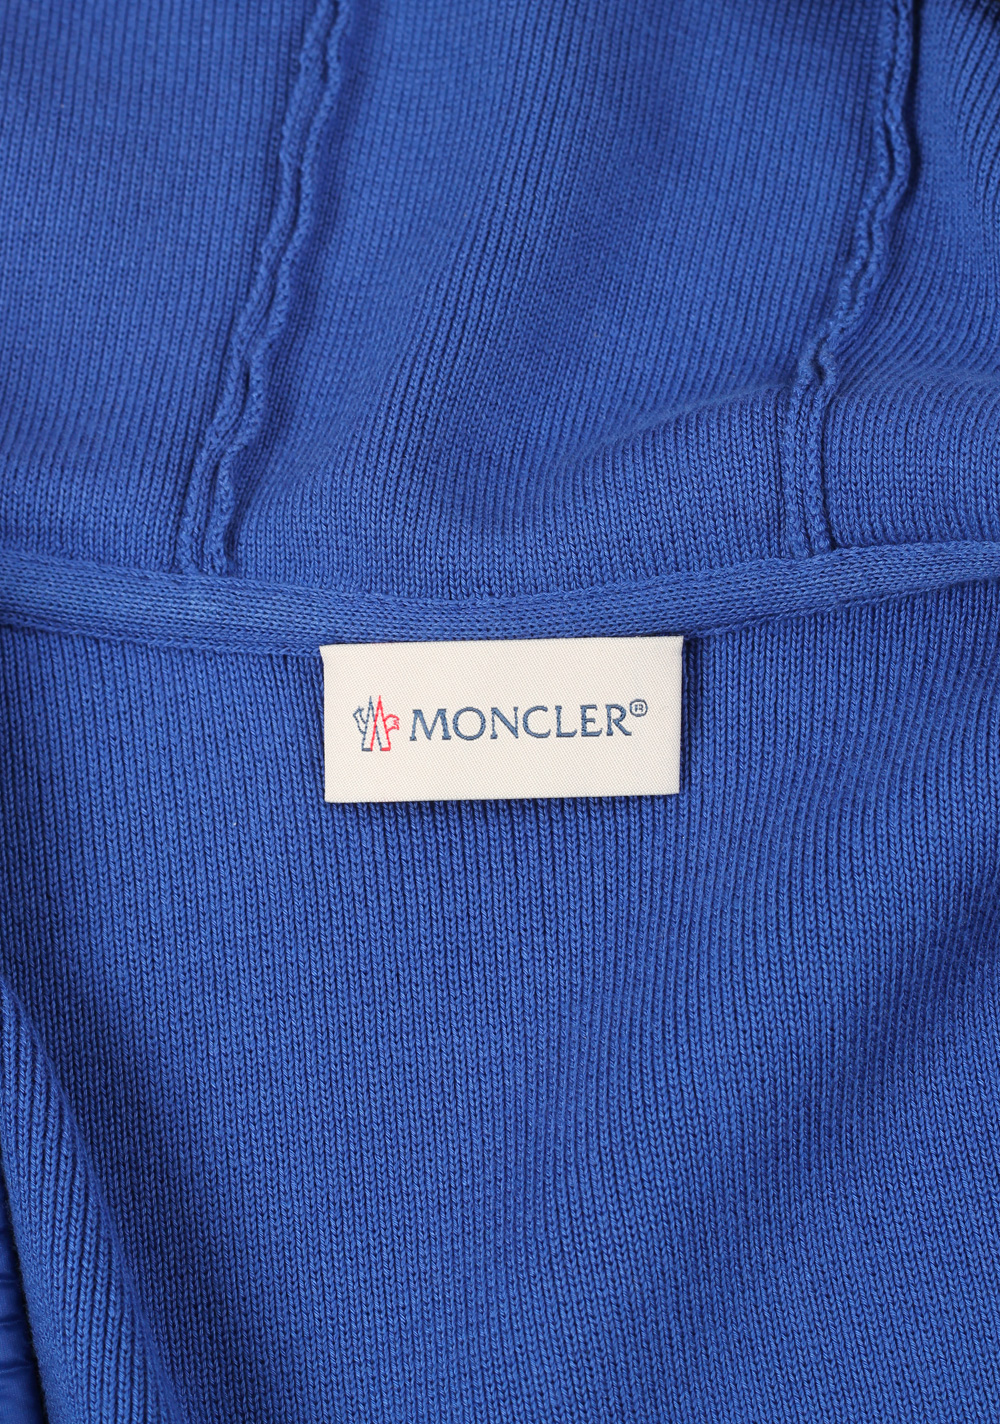 Moncler Padded Pull Sweater Size XL / 54 / 44R U.S. | Costume Limité